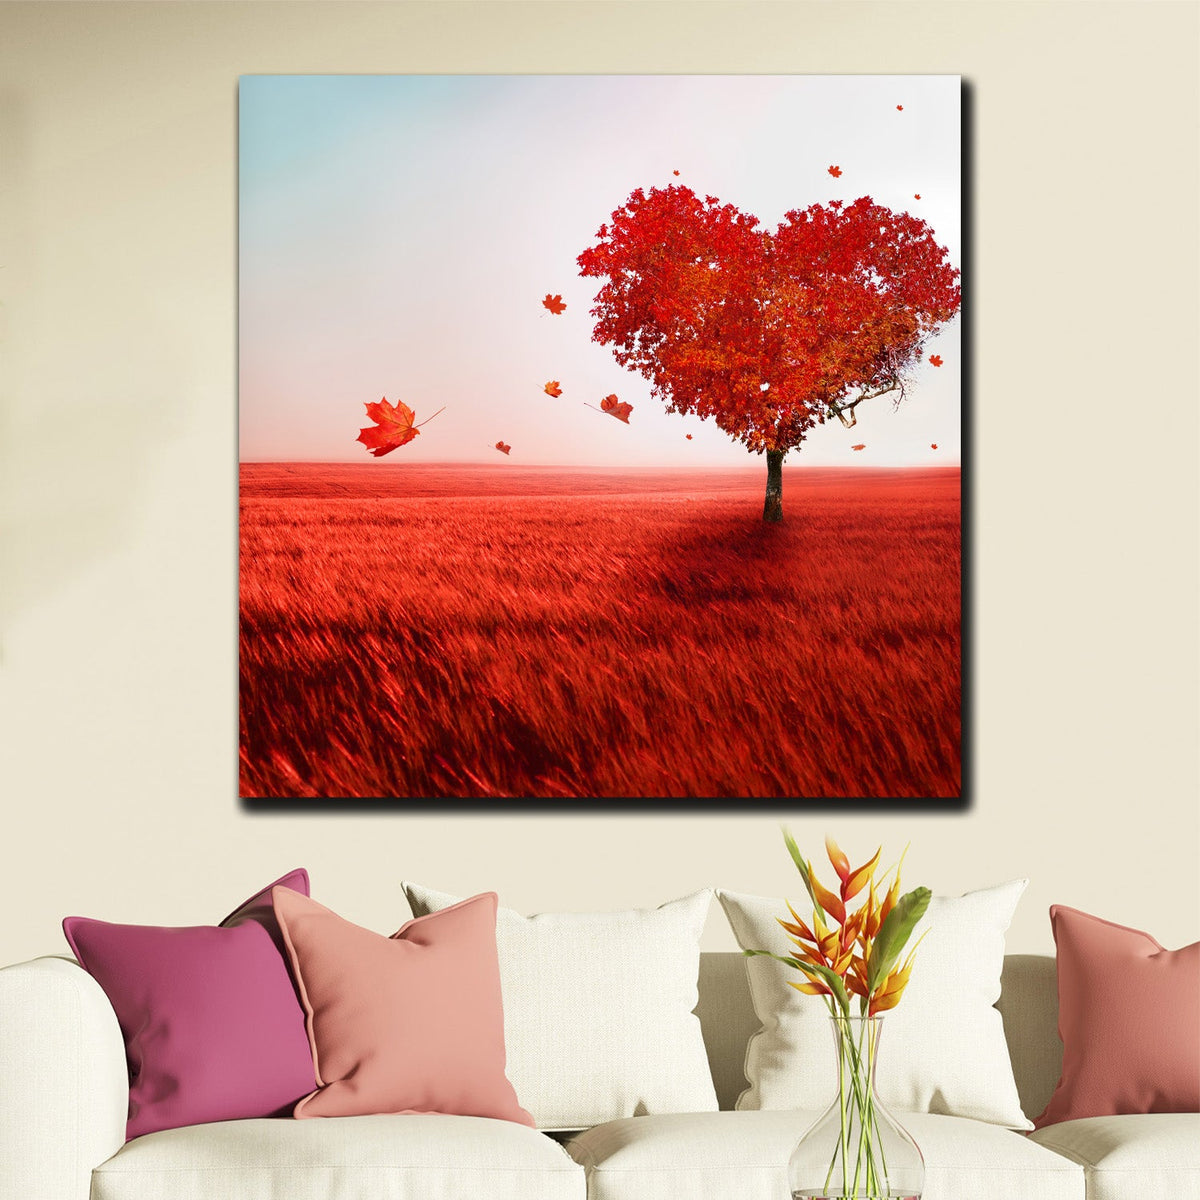 https://cdn.shopify.com/s/files/1/0387/9986/8044/products/TreeofLoveCanvasArtprintStretched-1.jpg